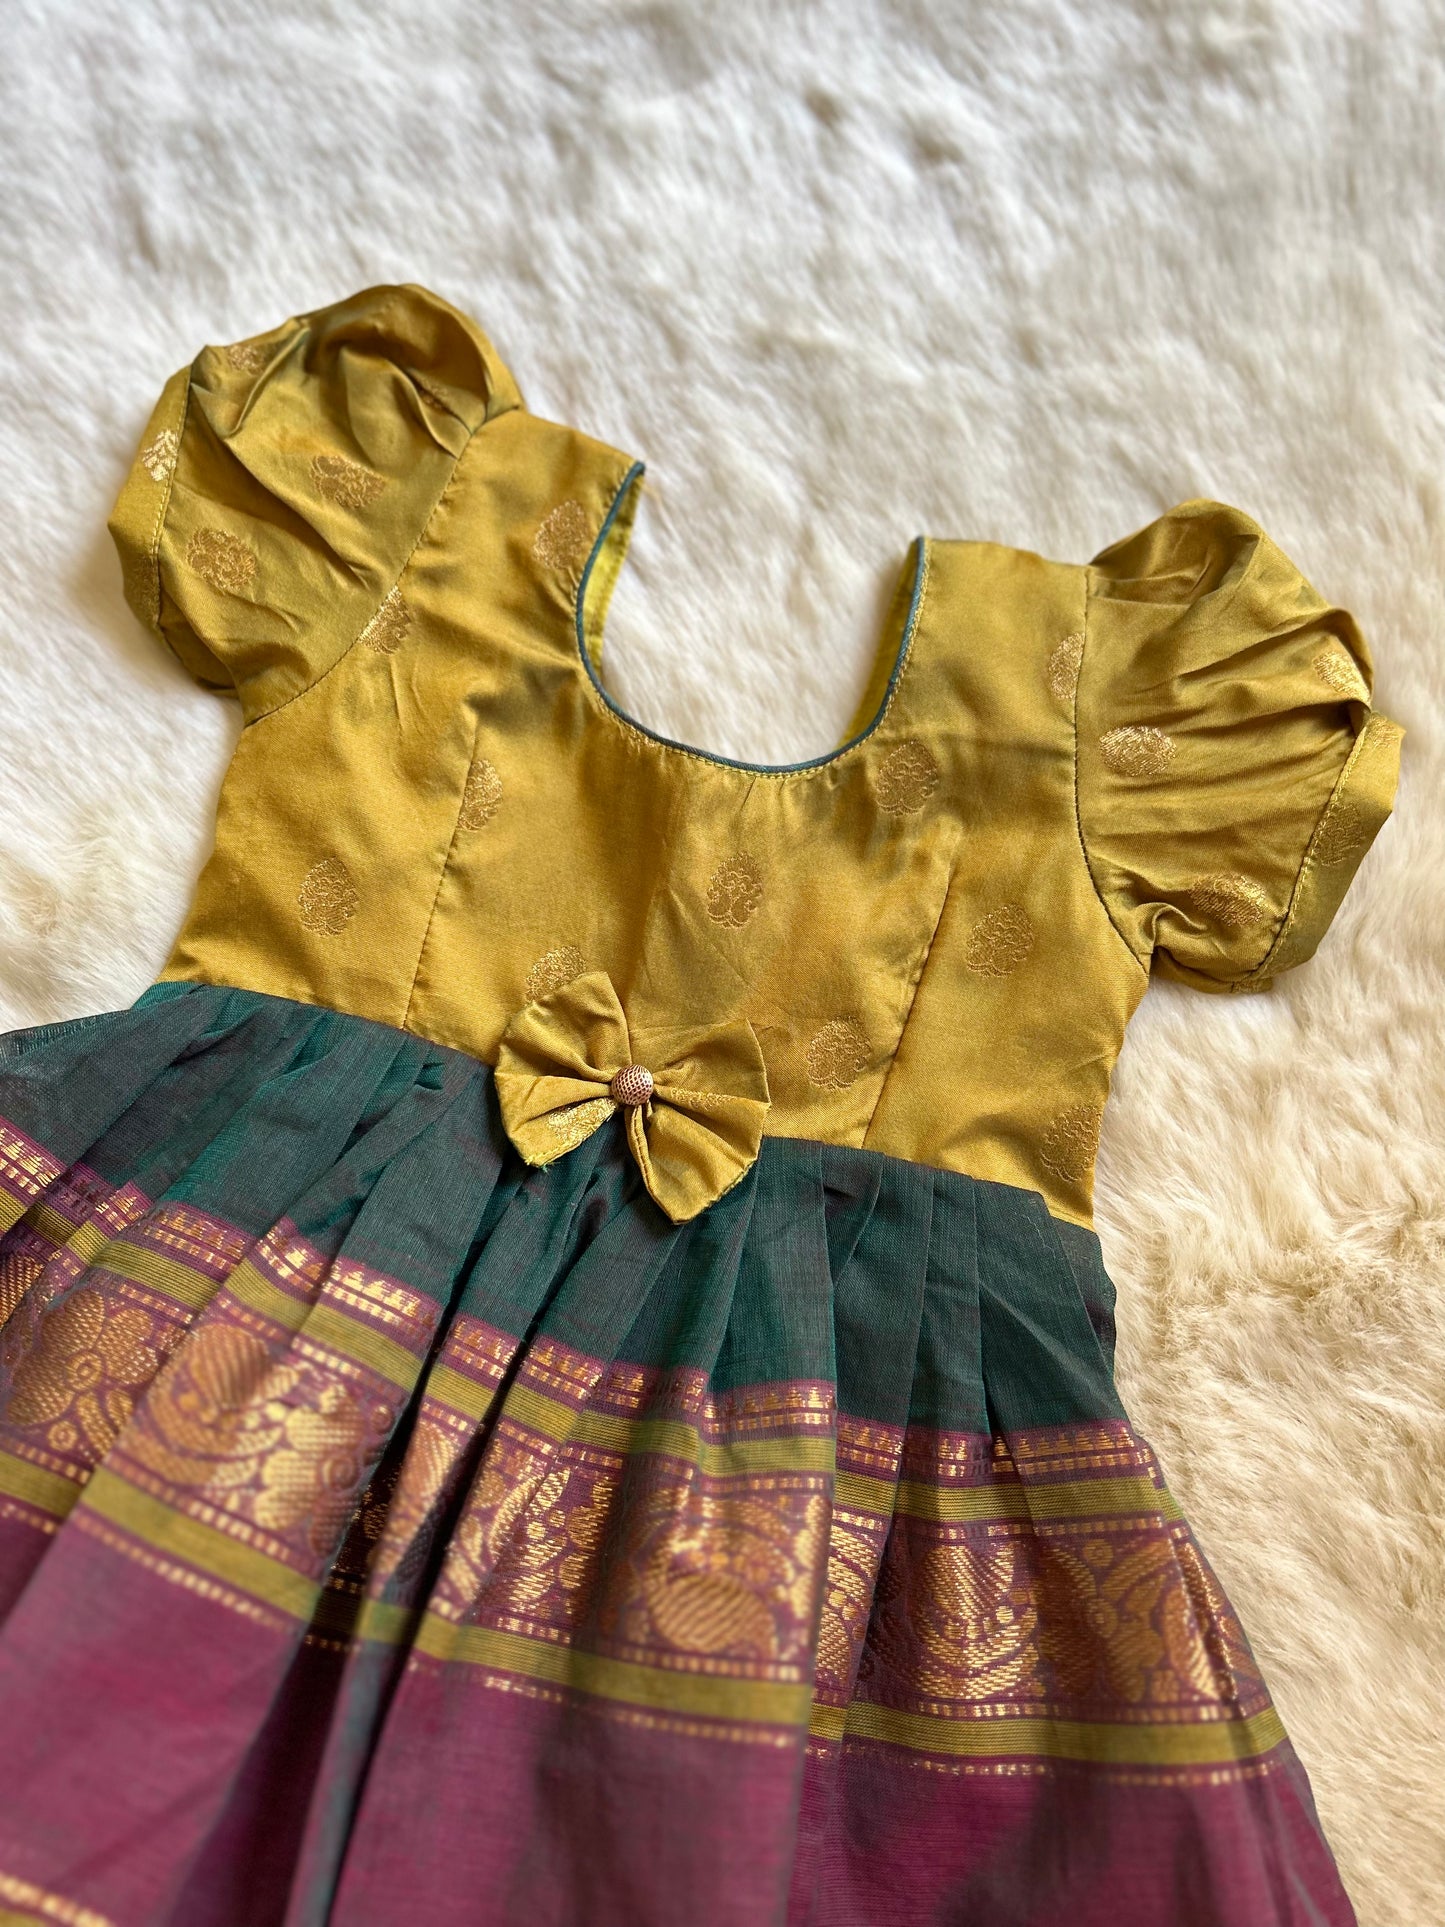 Olive Green and Rama Green (Bow) - Kanchi Cotton South Indian Ethnic Frock for Baby Girl